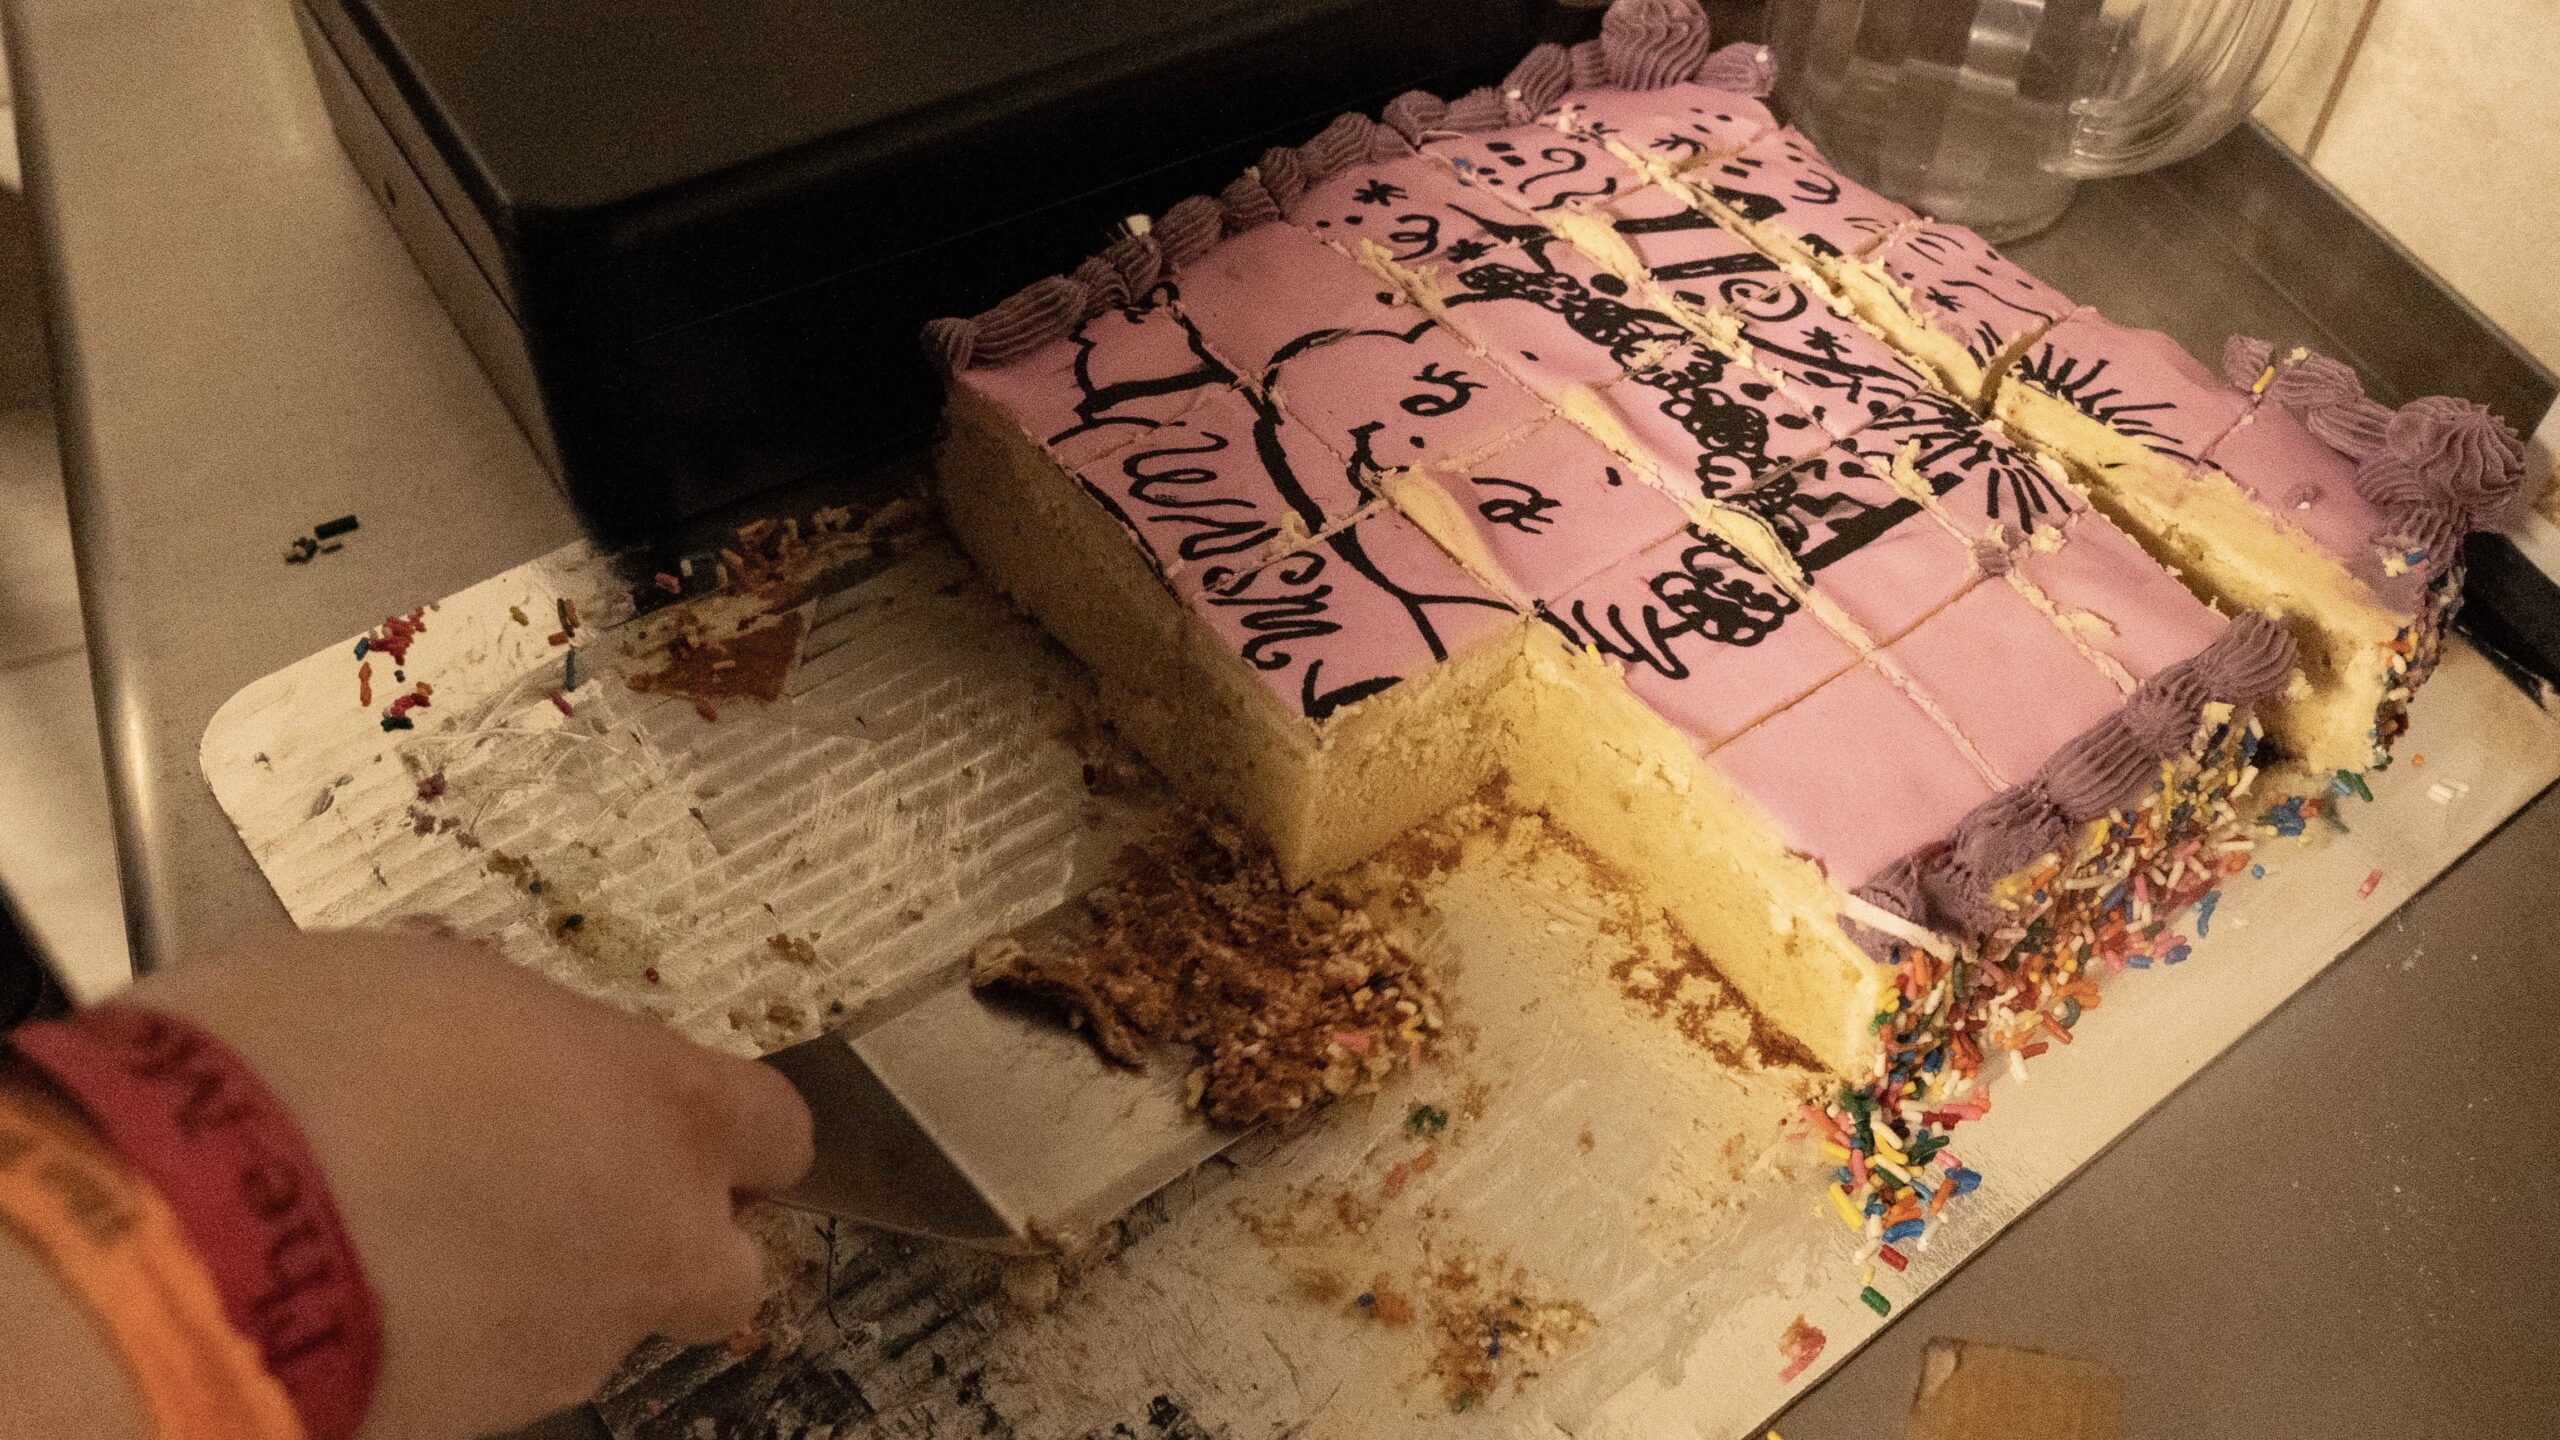 Image of a half eaten cut up birthday cake. The cake is pink with an angel wearing a WNSM shirt drawn in icing on top